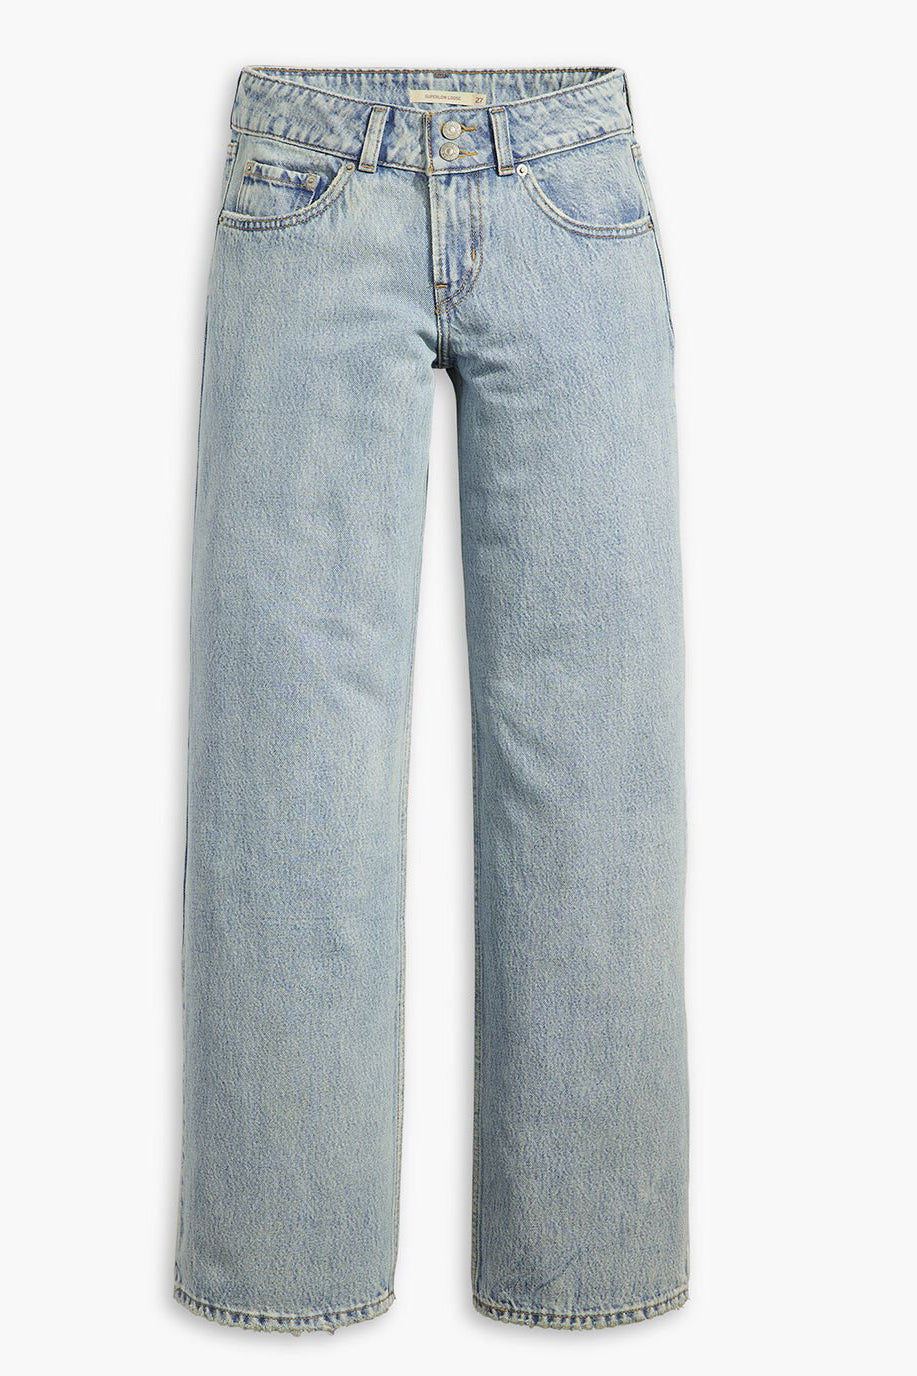 Levi's Superlow Jeans // Not In The Mood